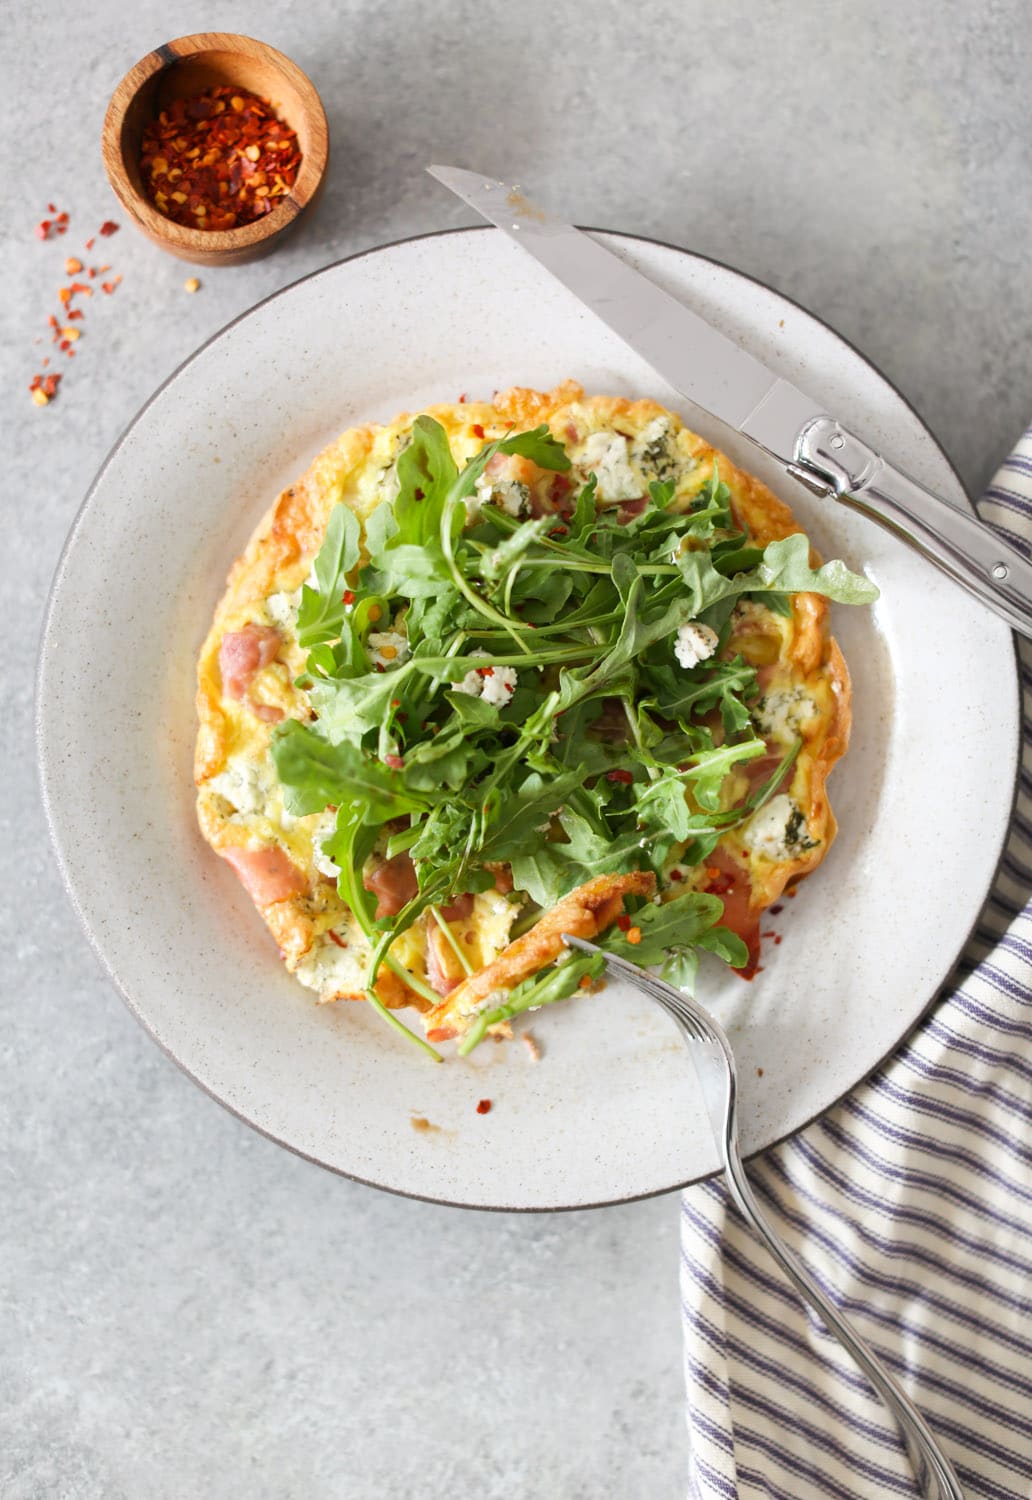 Personal Frittata with Prosciutto, Goat Cheese, and Arugula